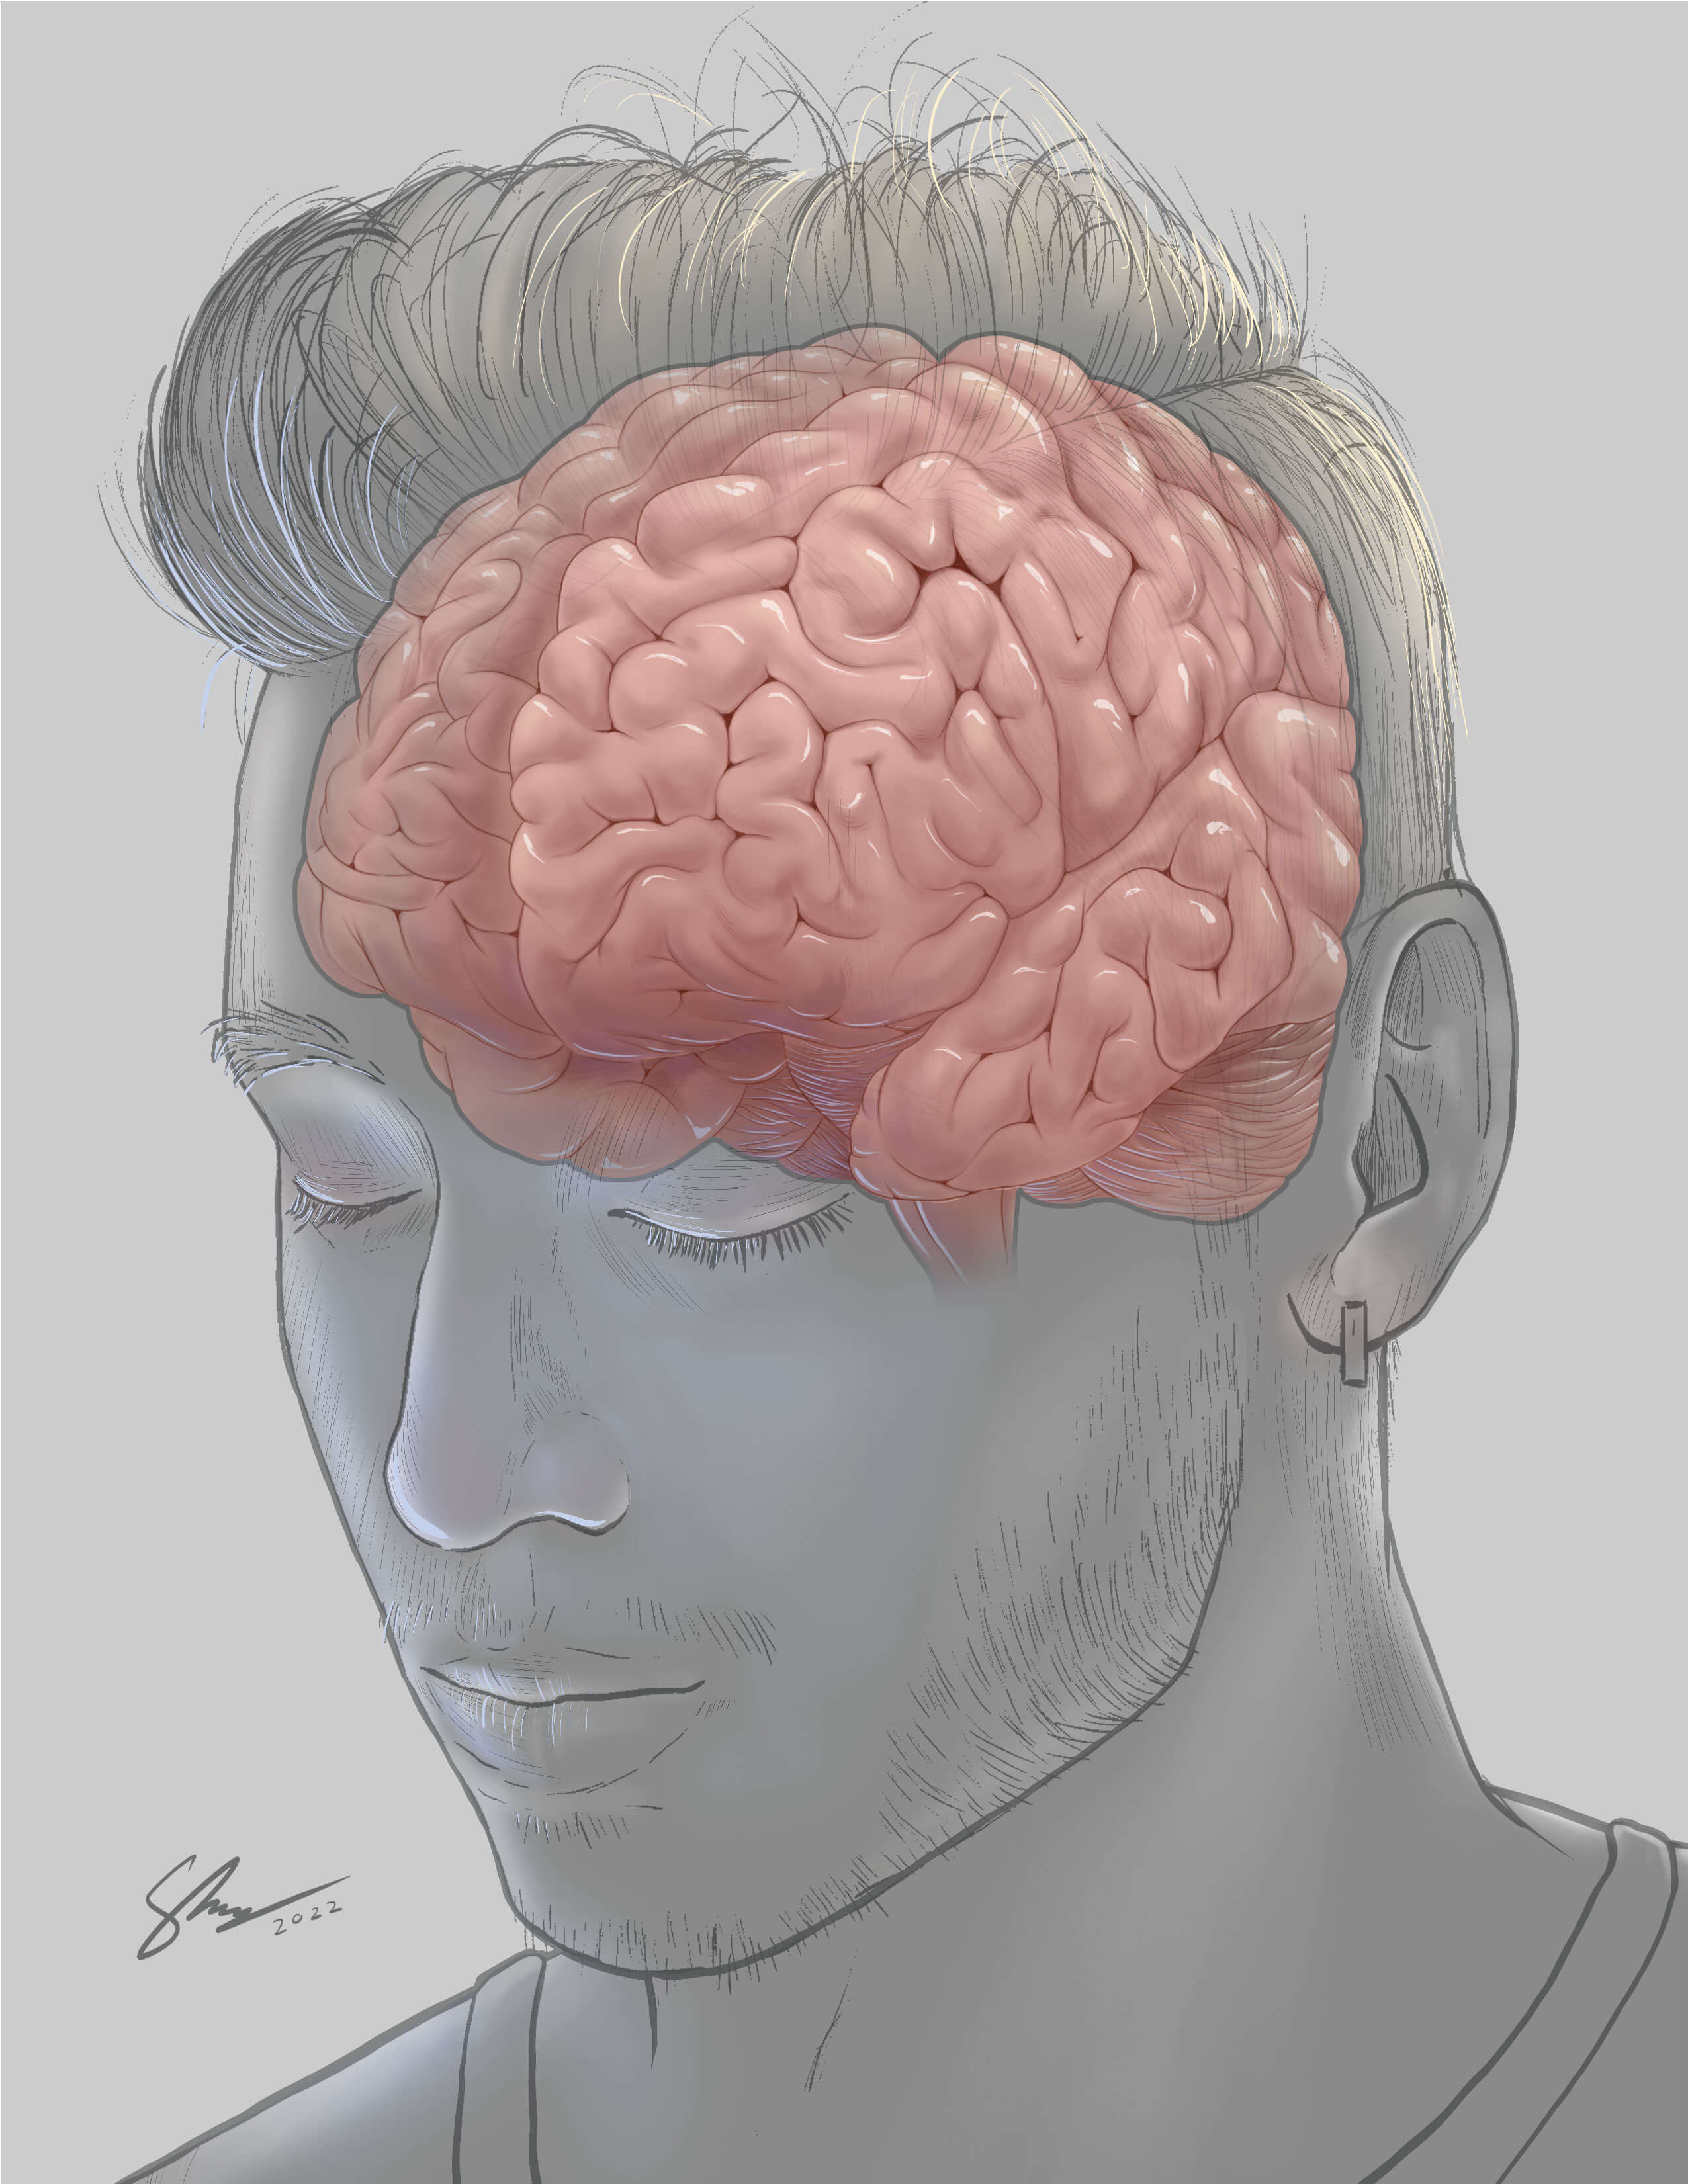 Final self-portrait with brain illustration including shading on brain and head